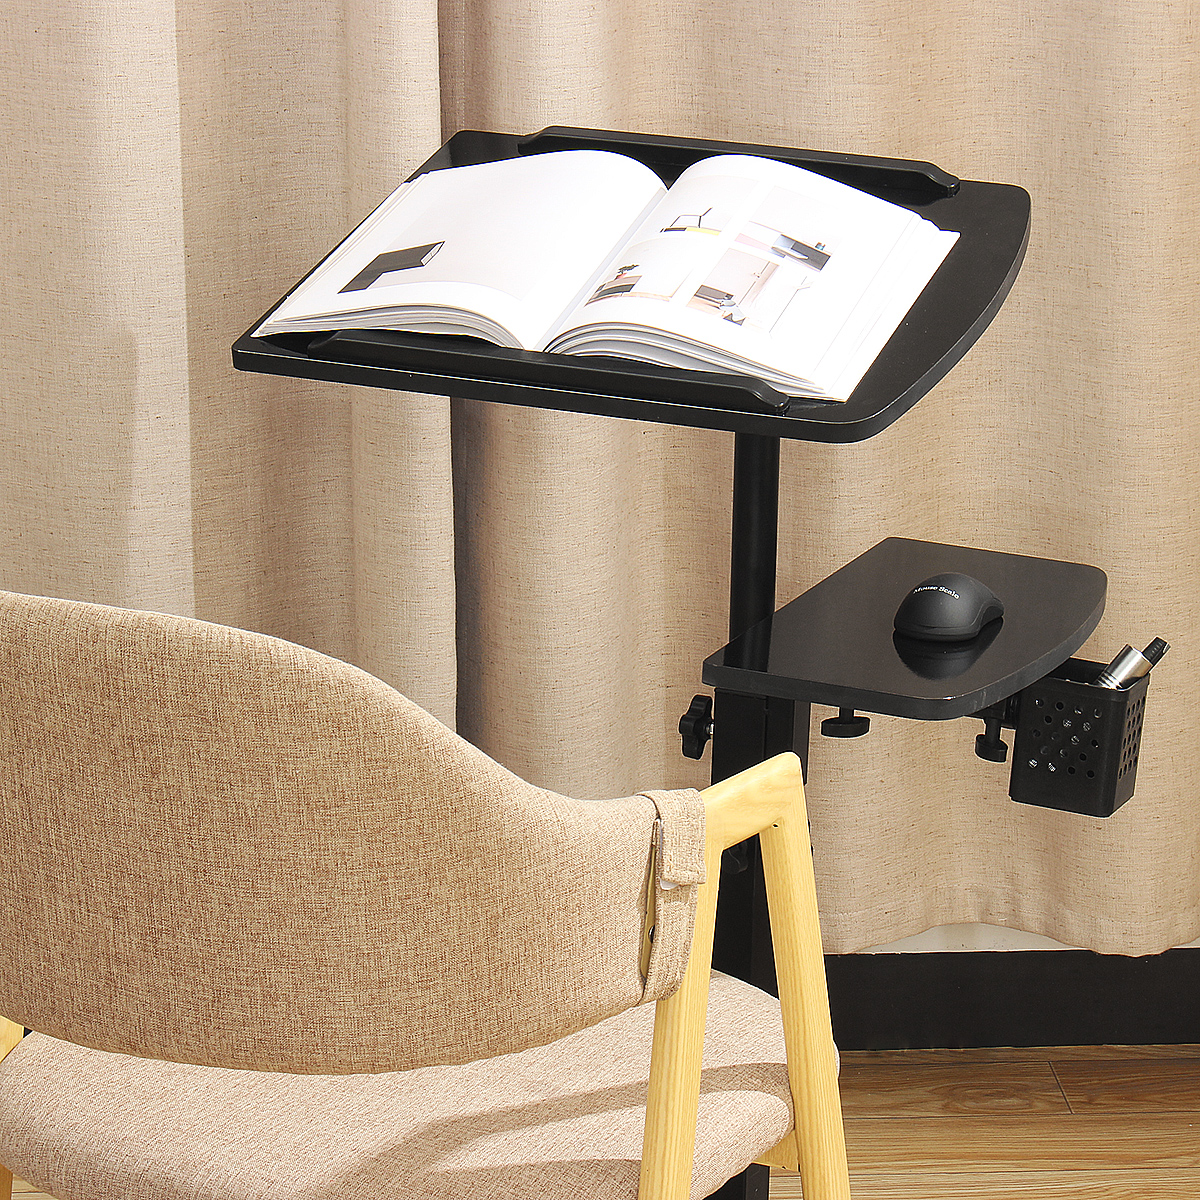 Double-lifting-360-degree-rotating-lazy-laptop-Stand-cooling-floor-removable-bedside-table-land-tabl-1630704-3